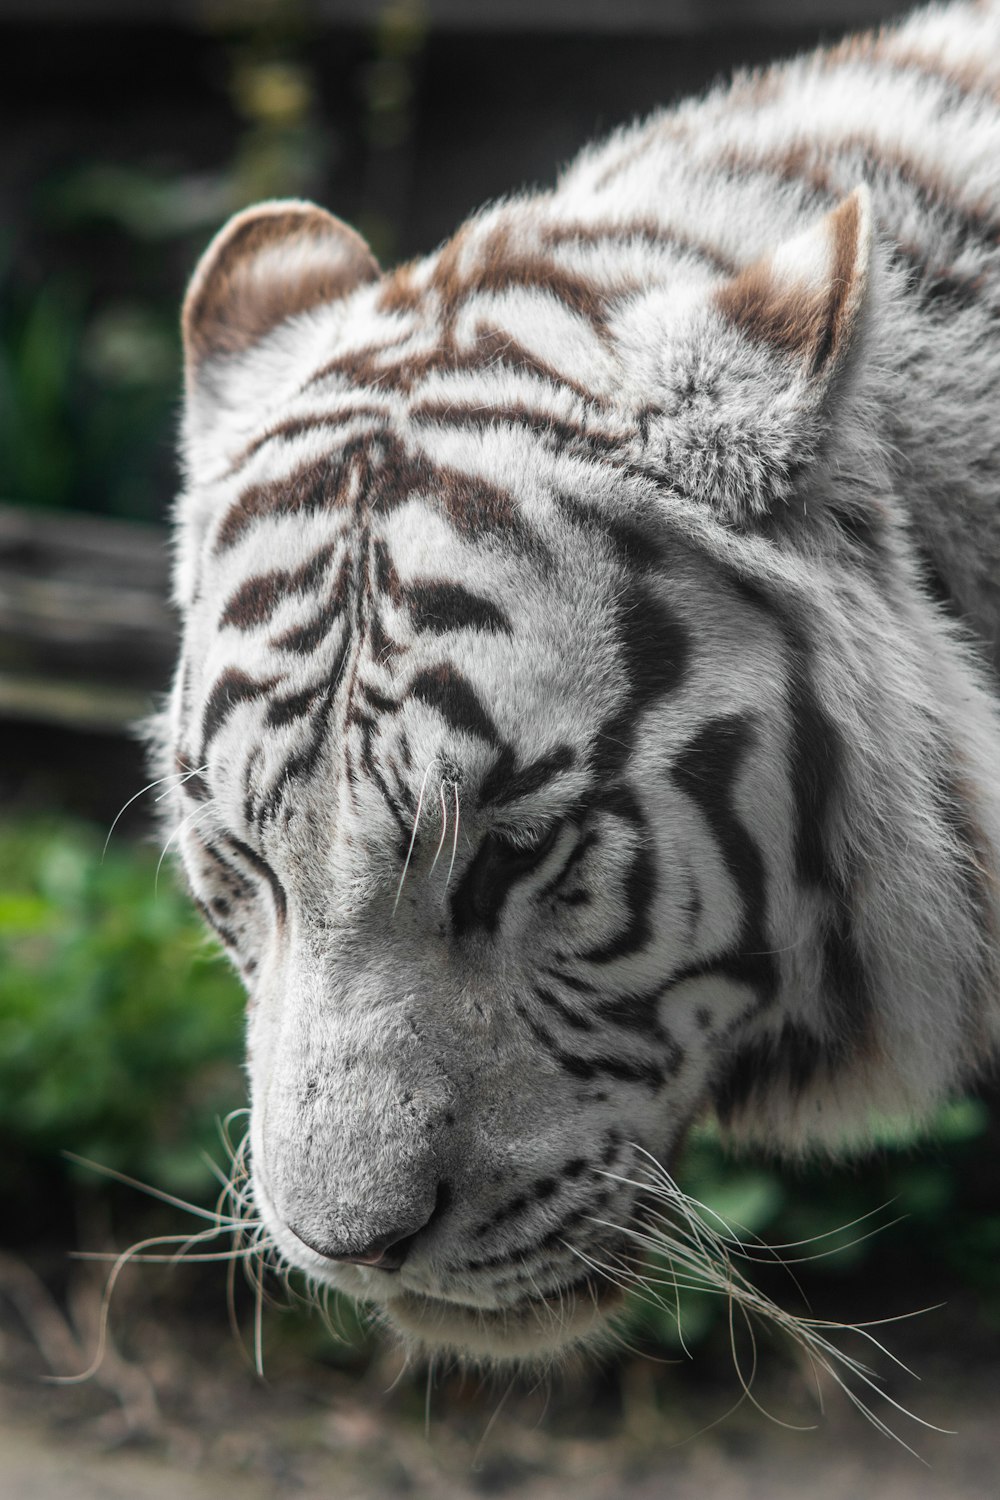 a close up of a white tiger with a blurry background